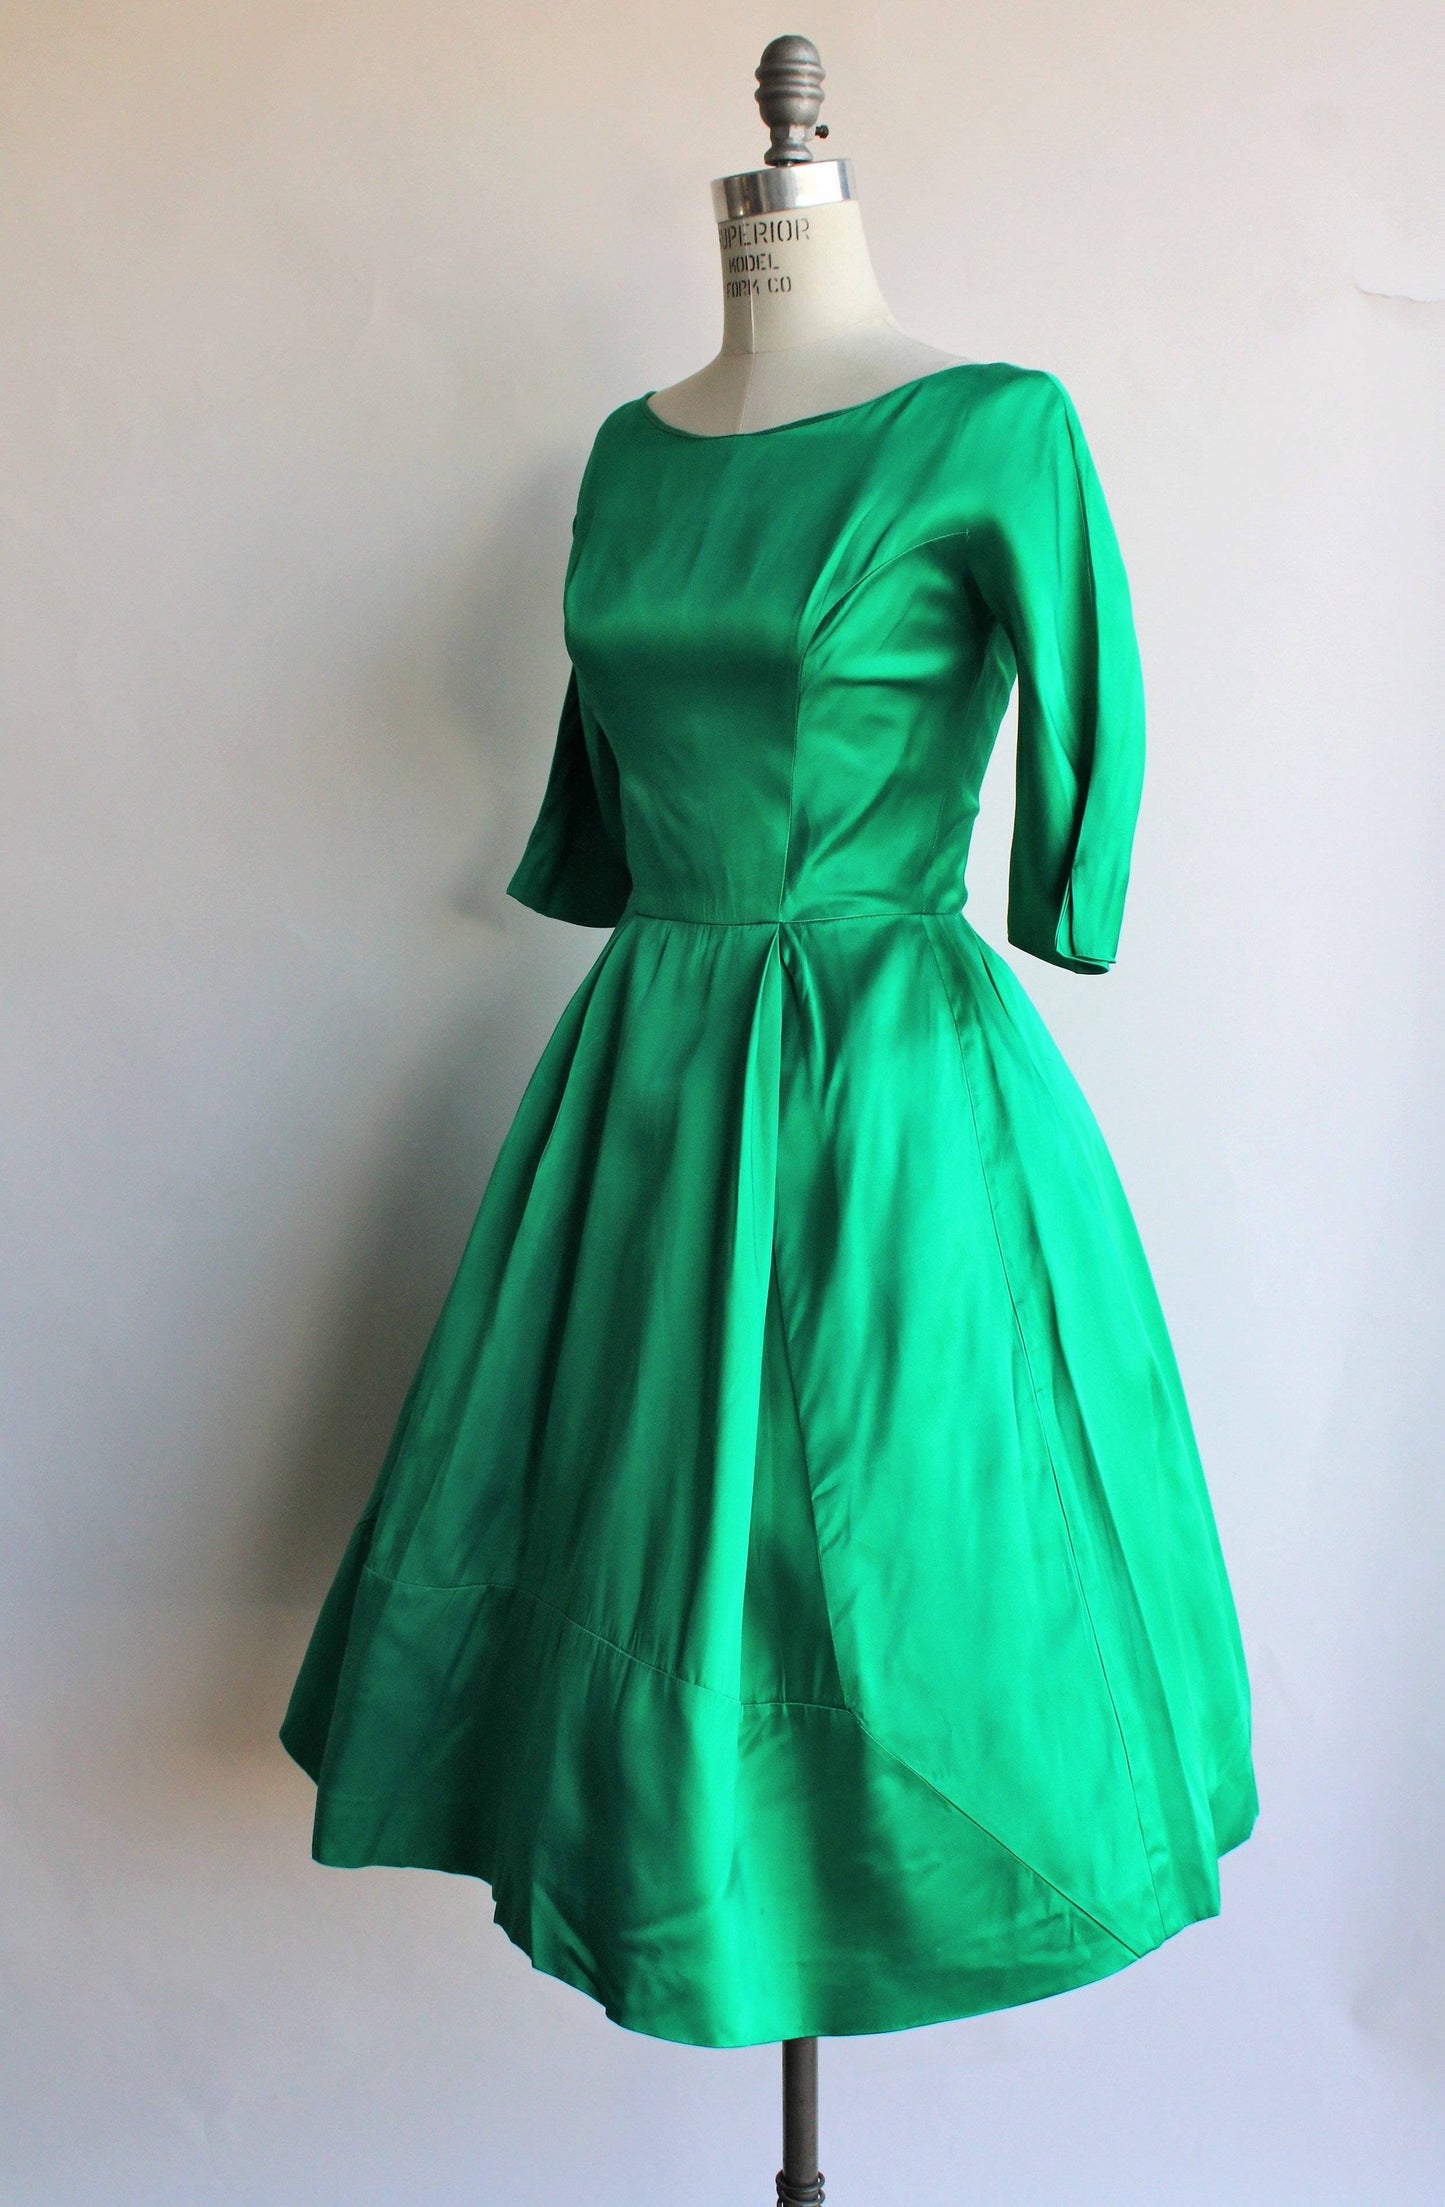 Vintage 1950s 1960s Lorrie Deb Fit and Flare Dress in Emerald Green Sa ...